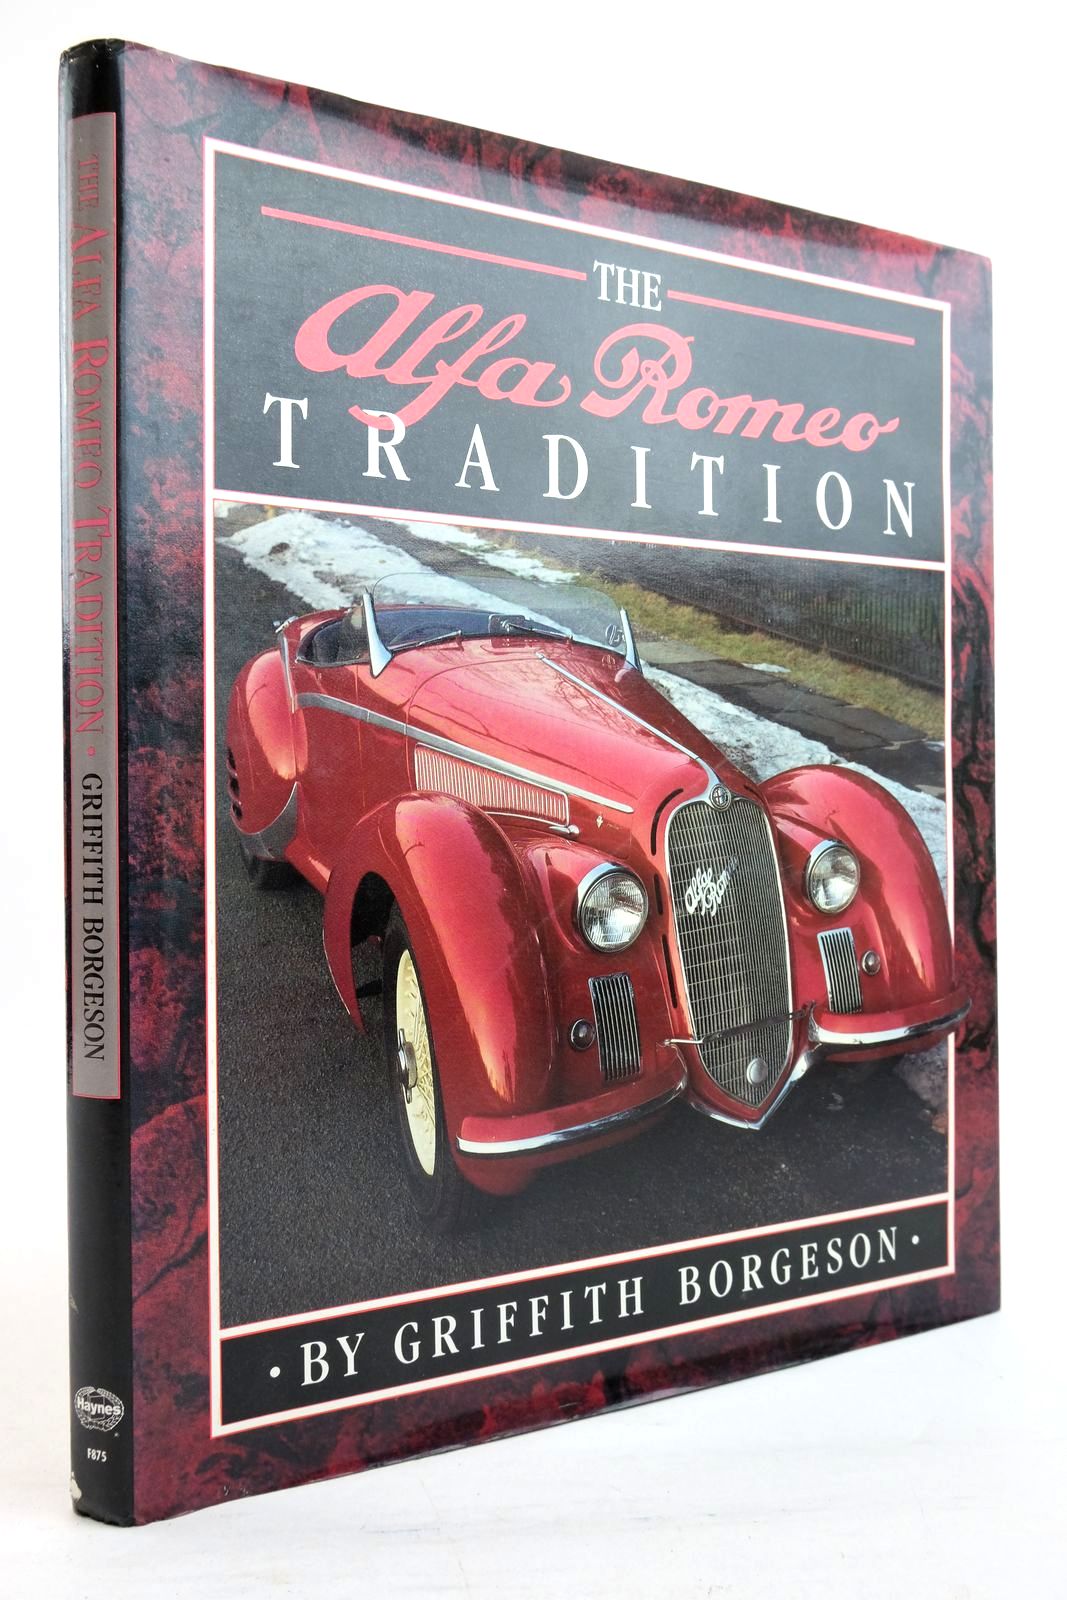 Photo of THE ALFA ROMEO TRADITION written by Borgeson, Griffith published by Haynes Publishing Group (STOCK CODE: 2134528)  for sale by Stella & Rose's Books